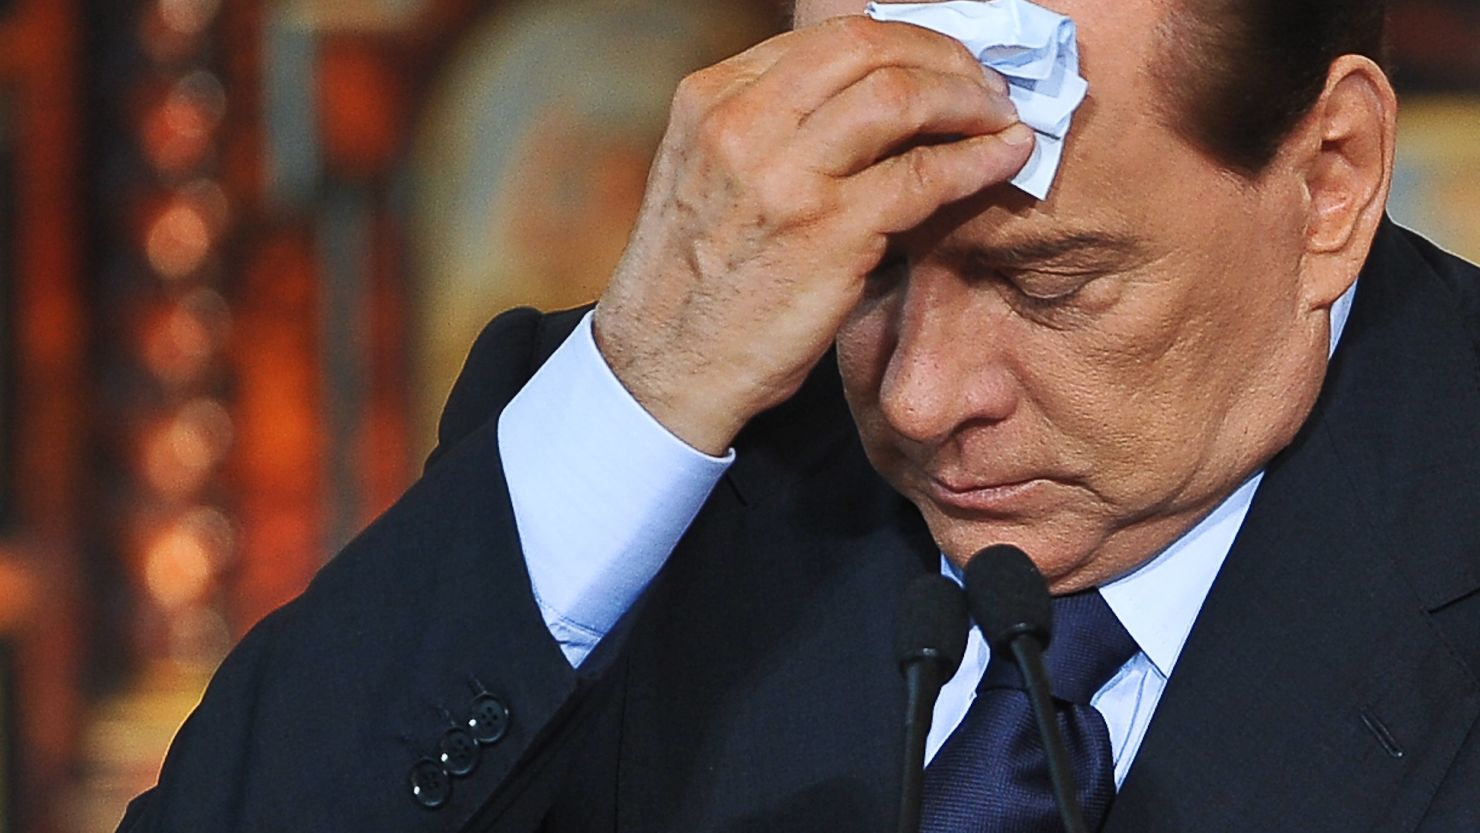 Former Italian Prime Minister Silvio Berlusconi is facing charges of sex with an underage prostitute.